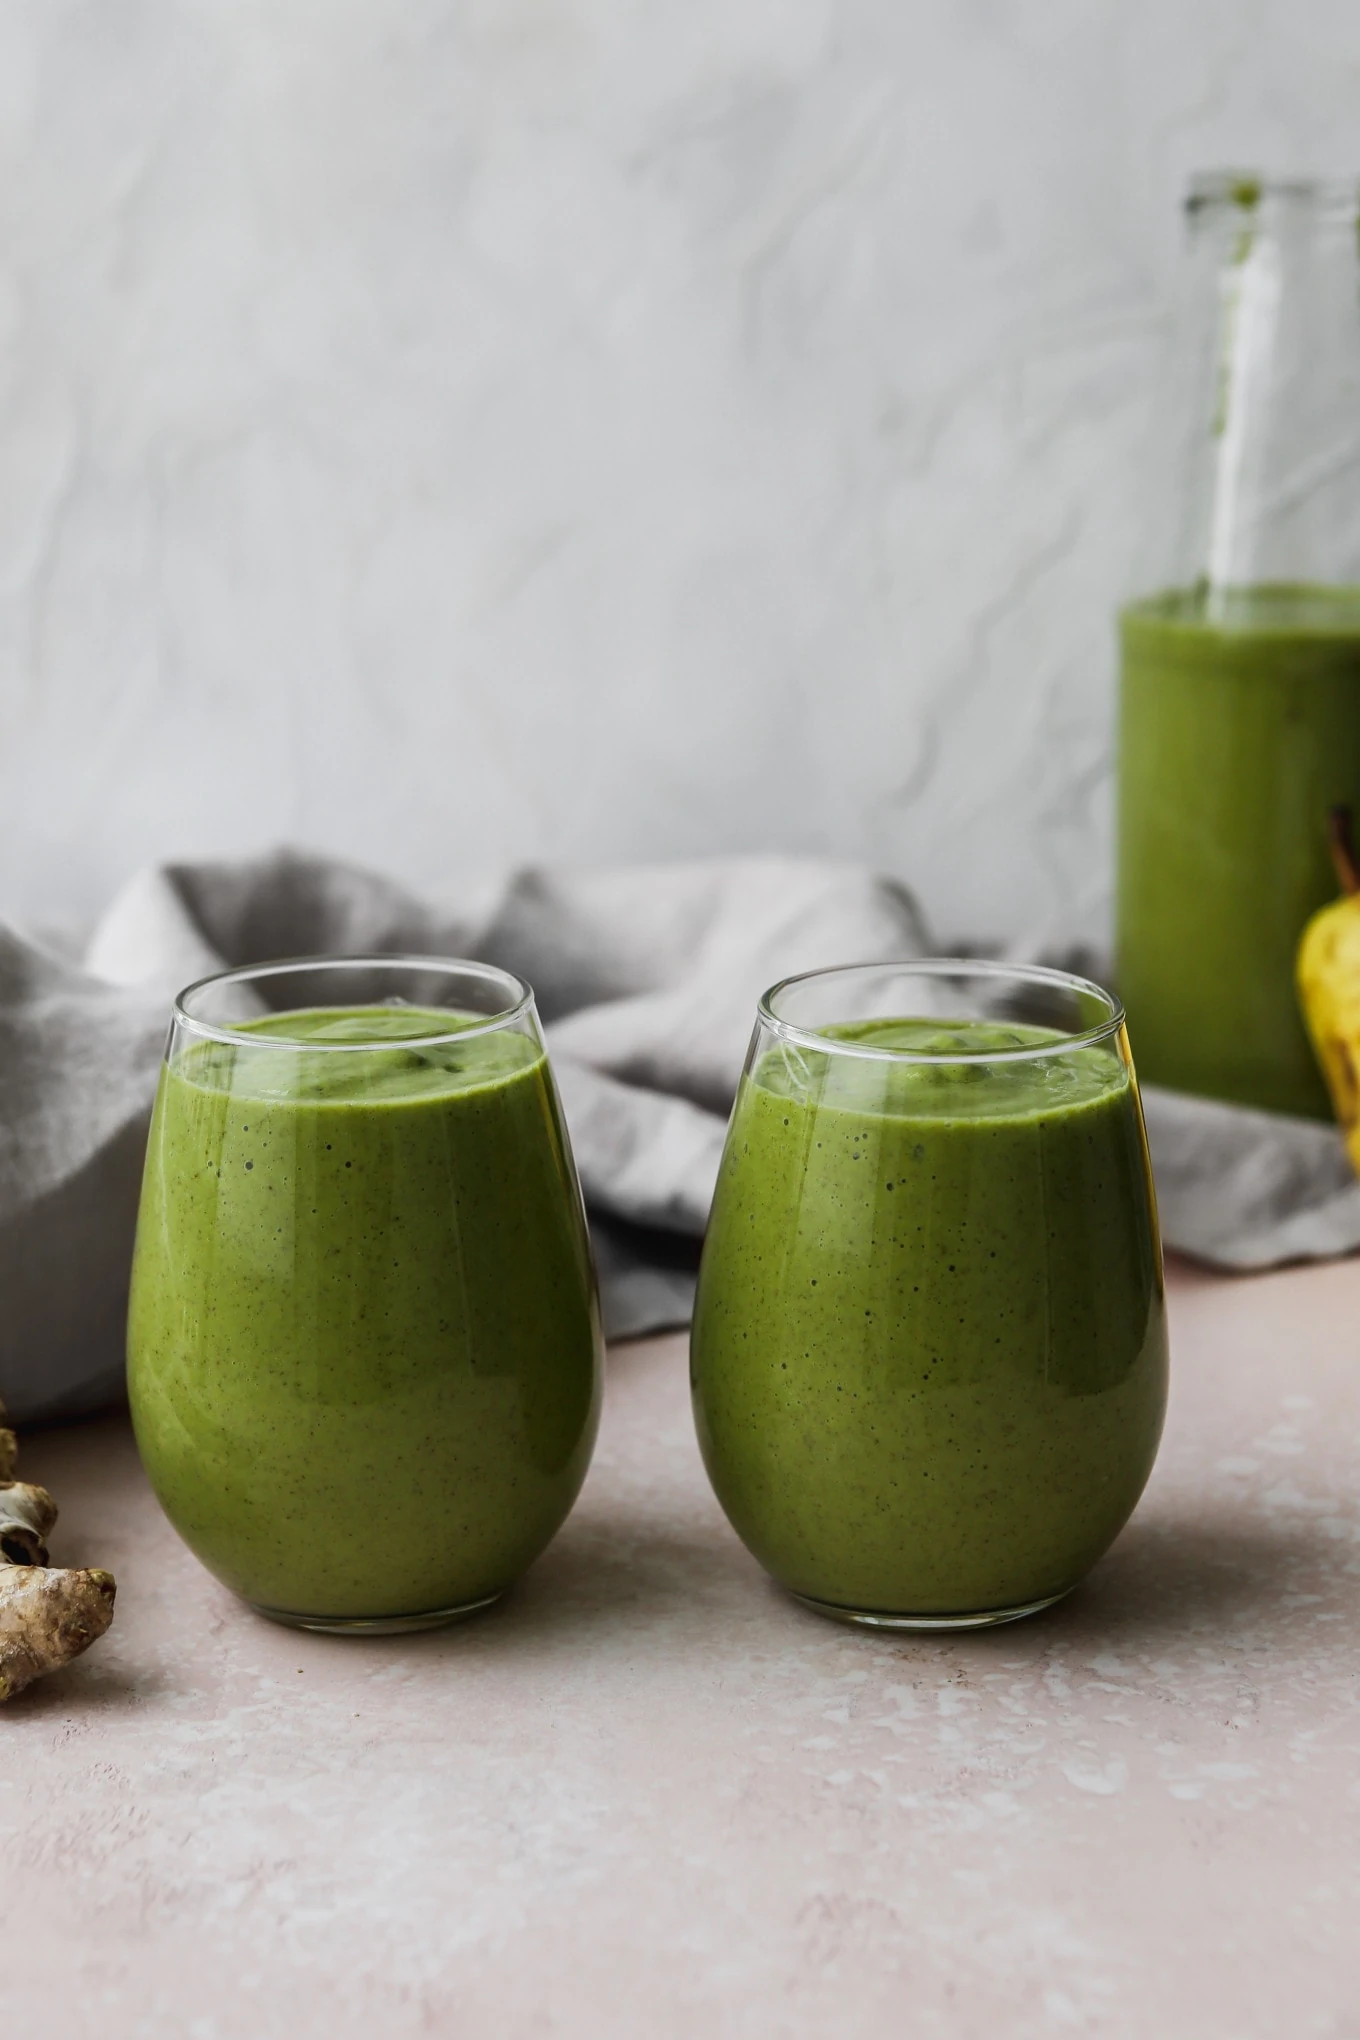 Straight on photograph of two small glasses filled with a pear green smoothie.